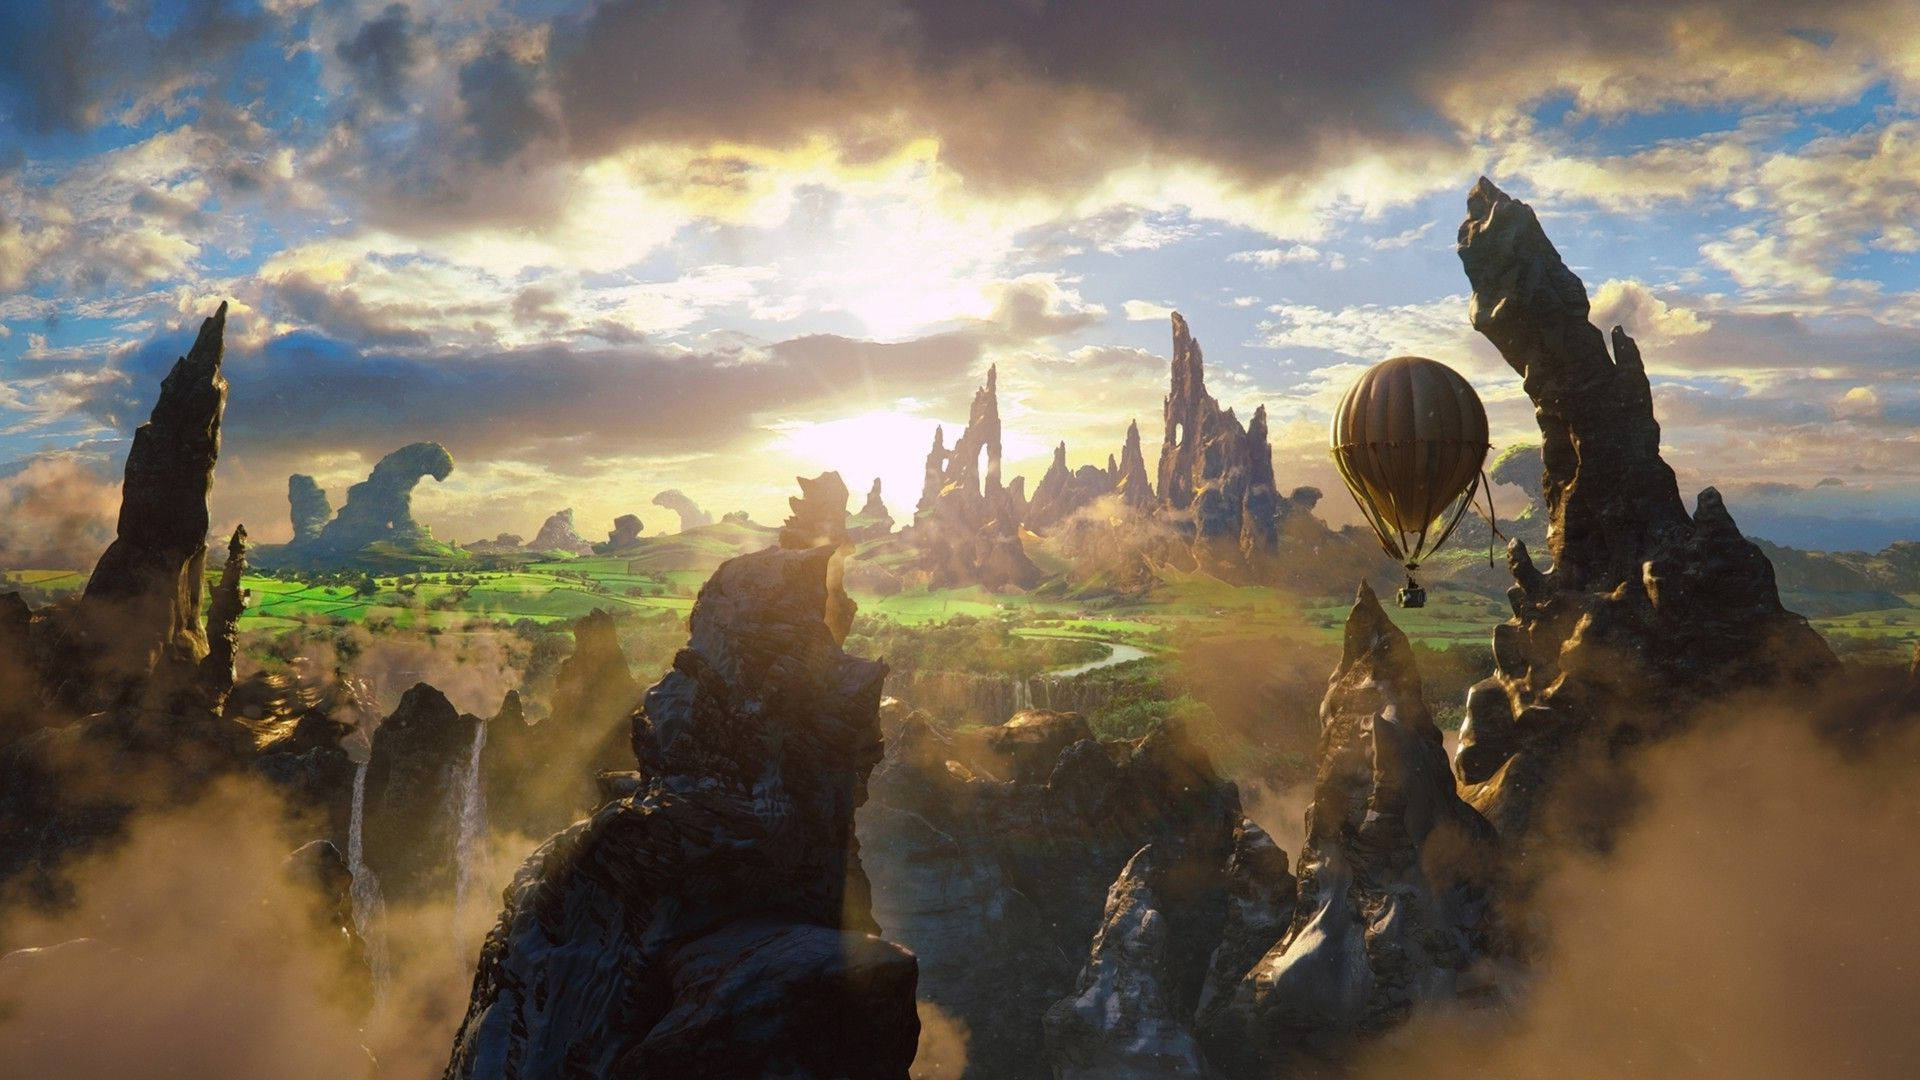 Oz The Great And Powerful Fantasy Landscape Wallpaper